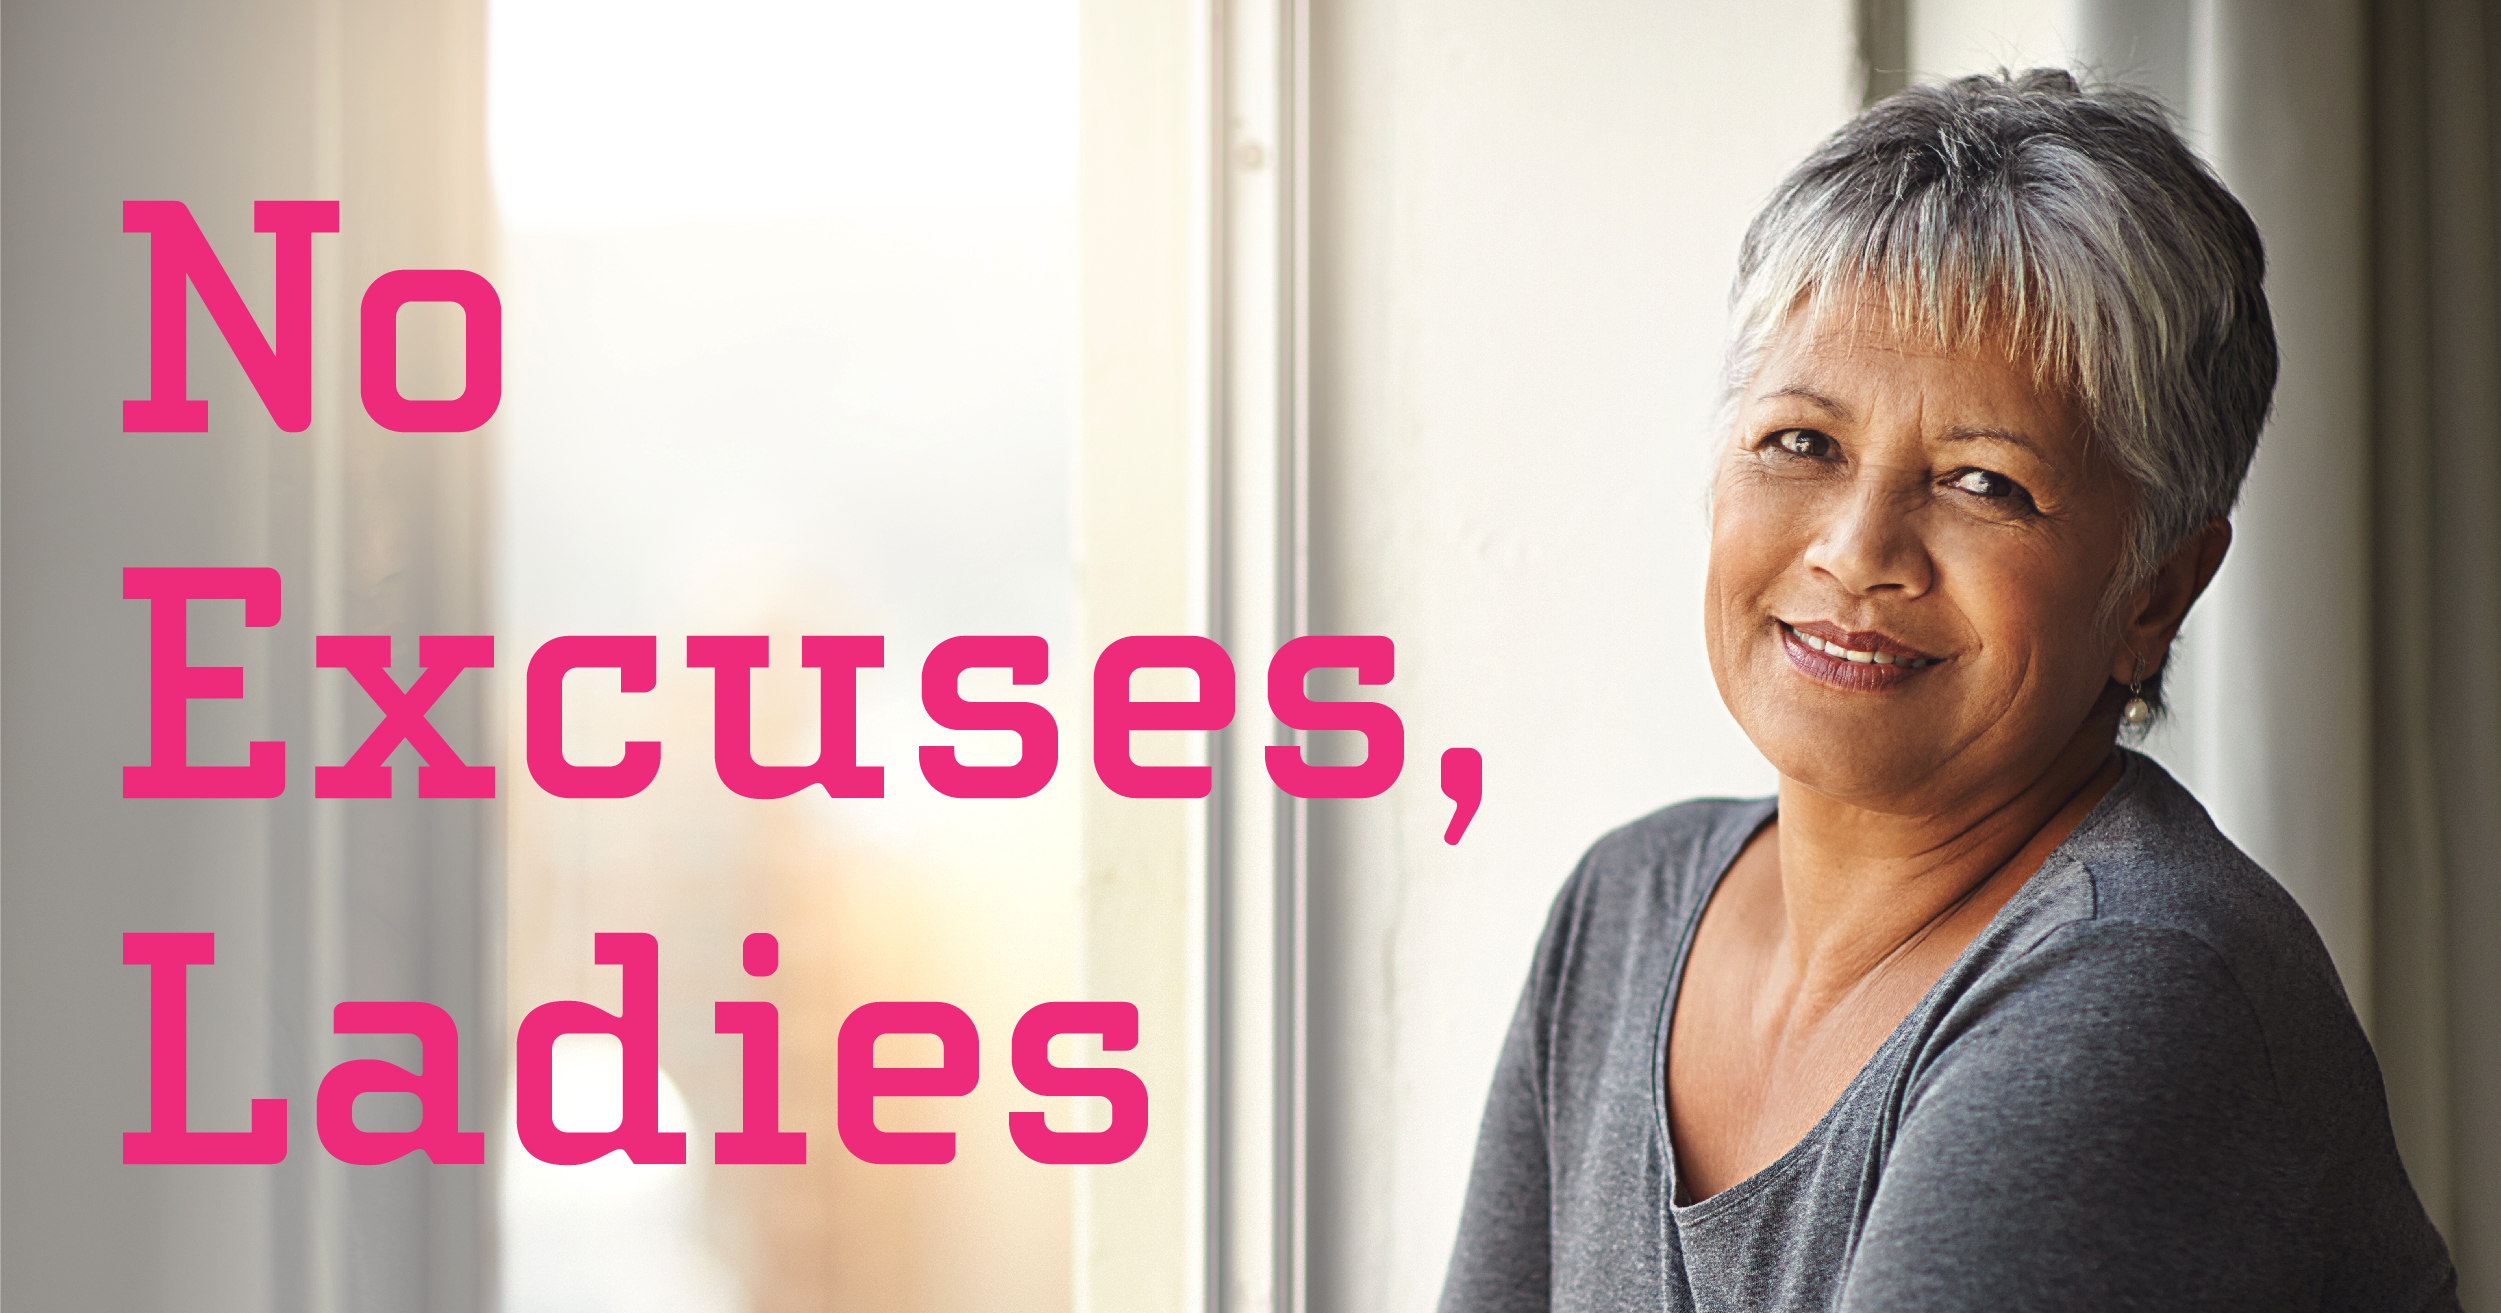 woman smiling with text that reads, "No excuses, ladies"